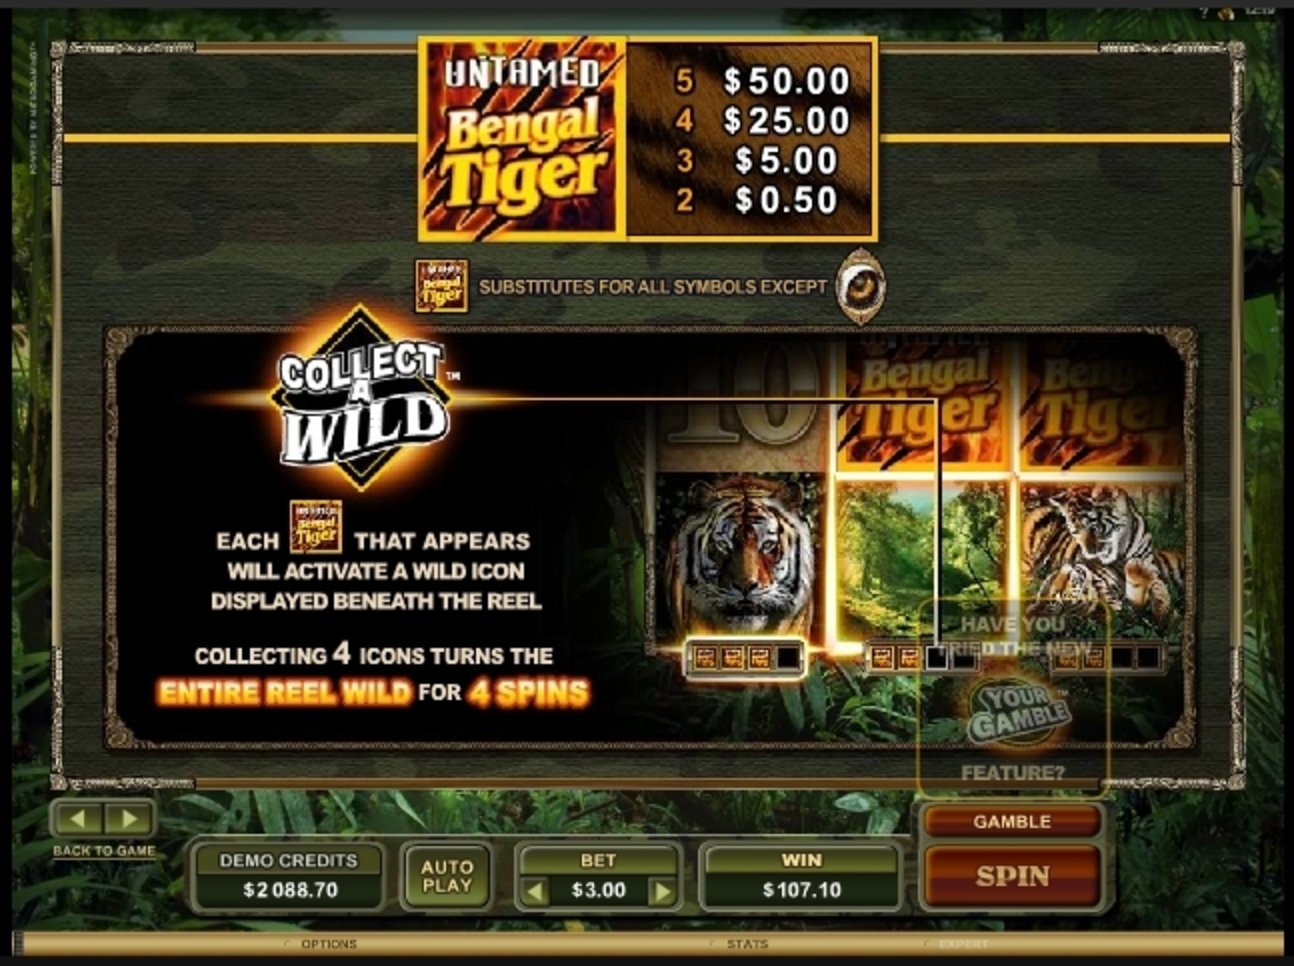 Info of Untamed Bengal Tiger Slot Game by Microgaming